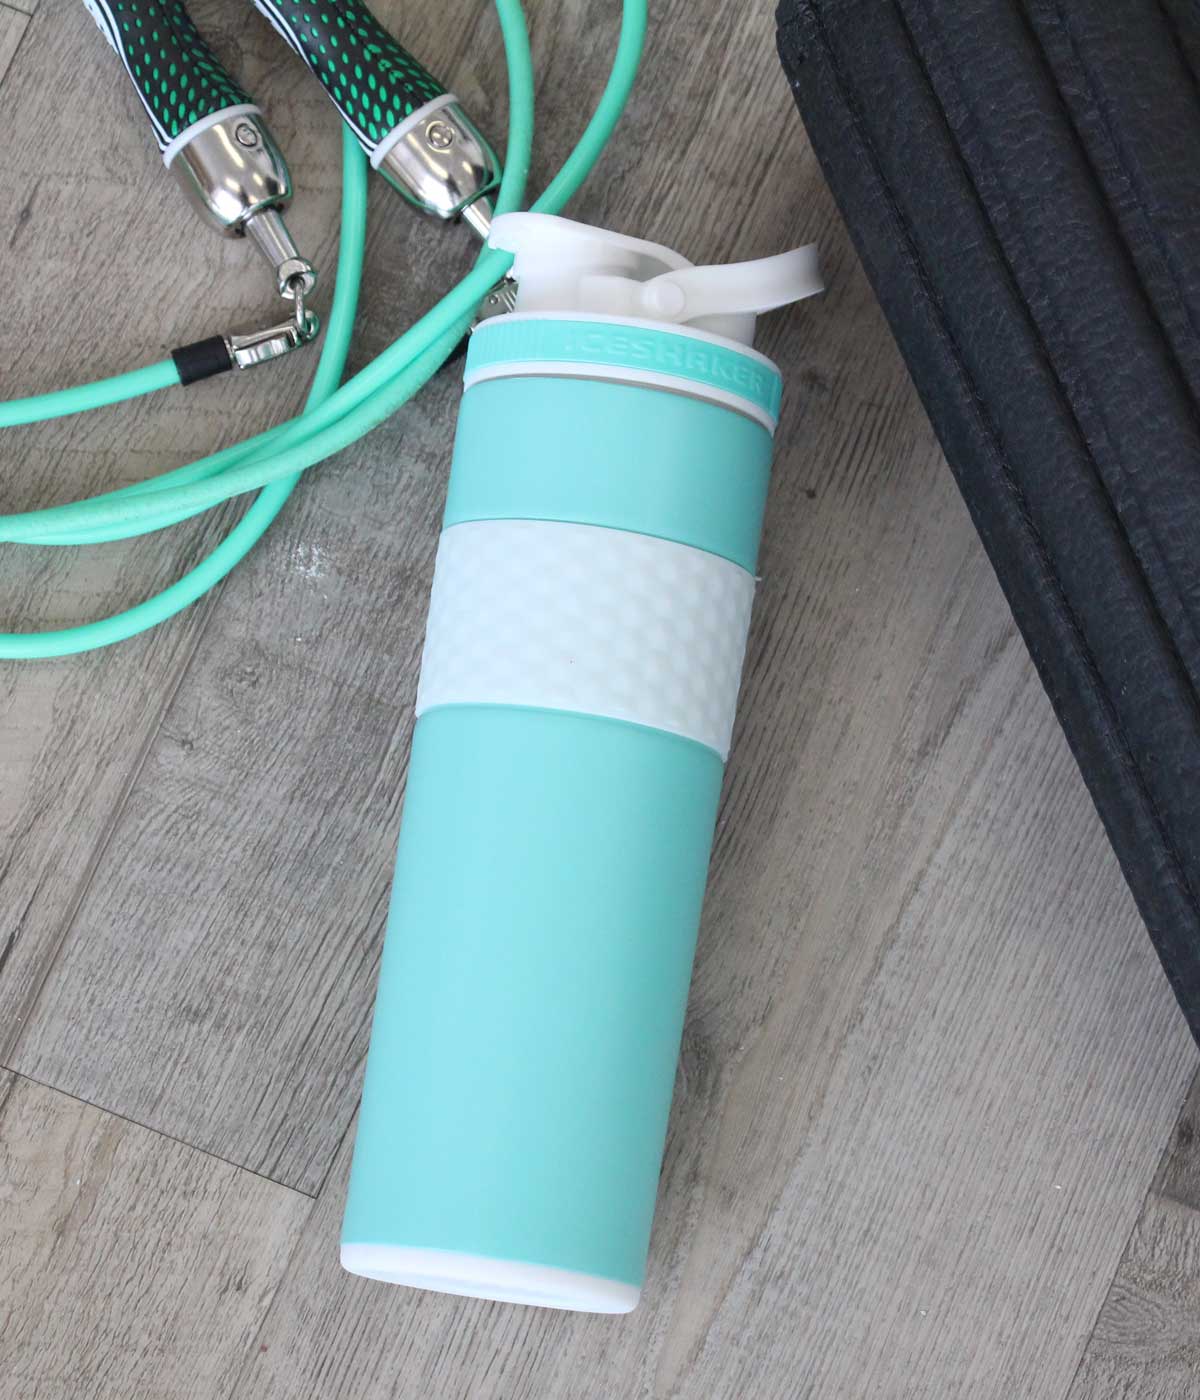 A mint 20oz Skinny Shaker with a mint-colored jump rope next to it.